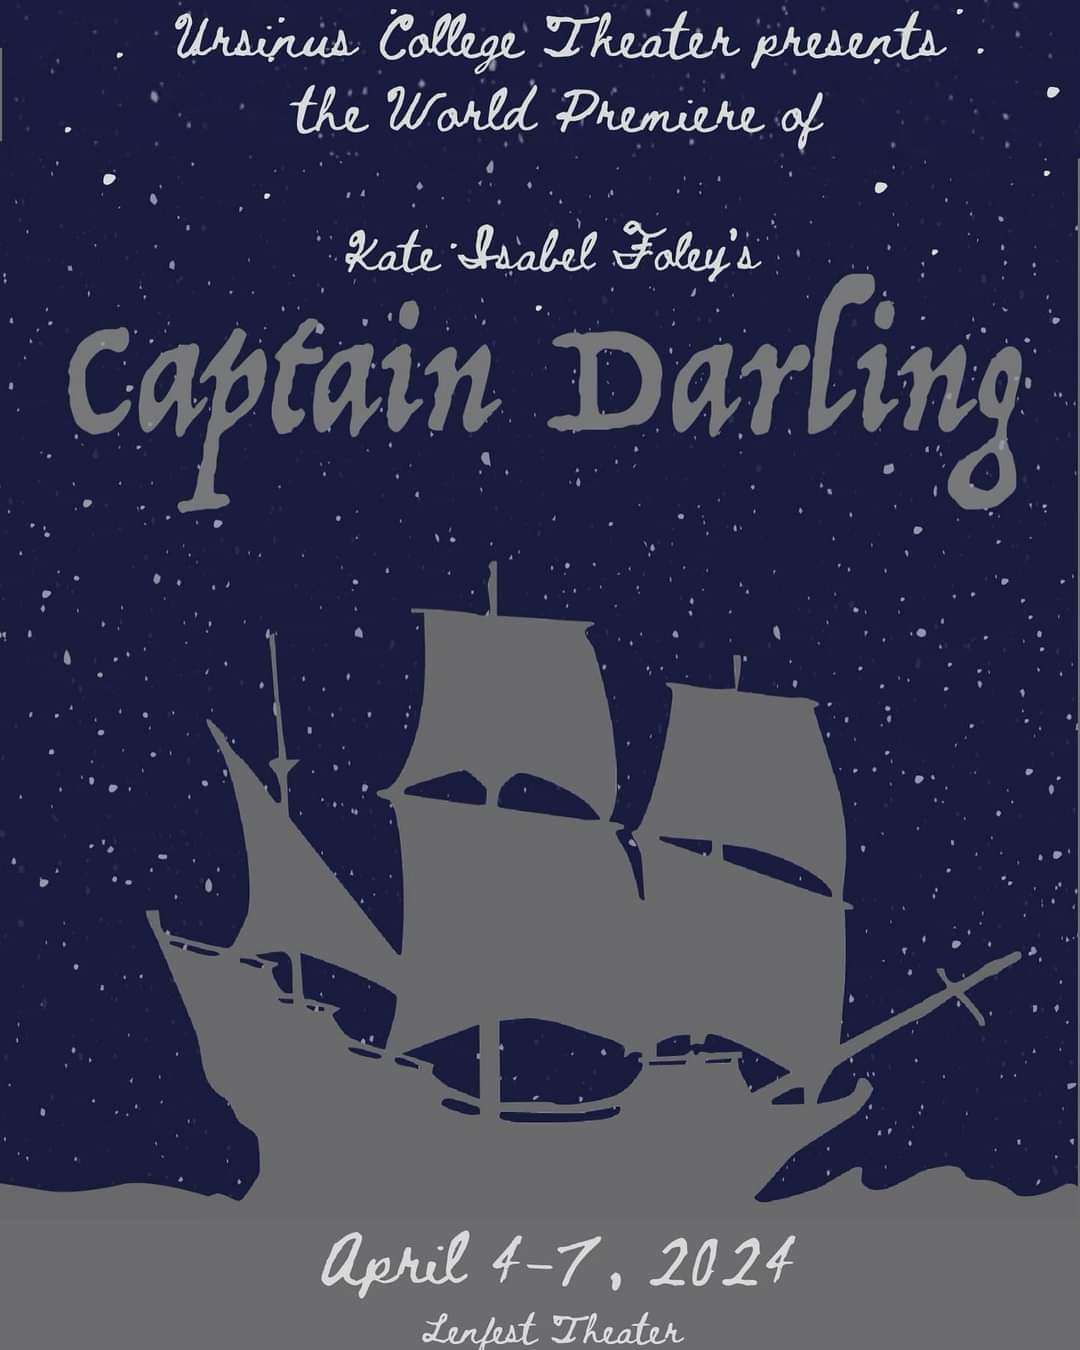 Another poster for Captain Darling